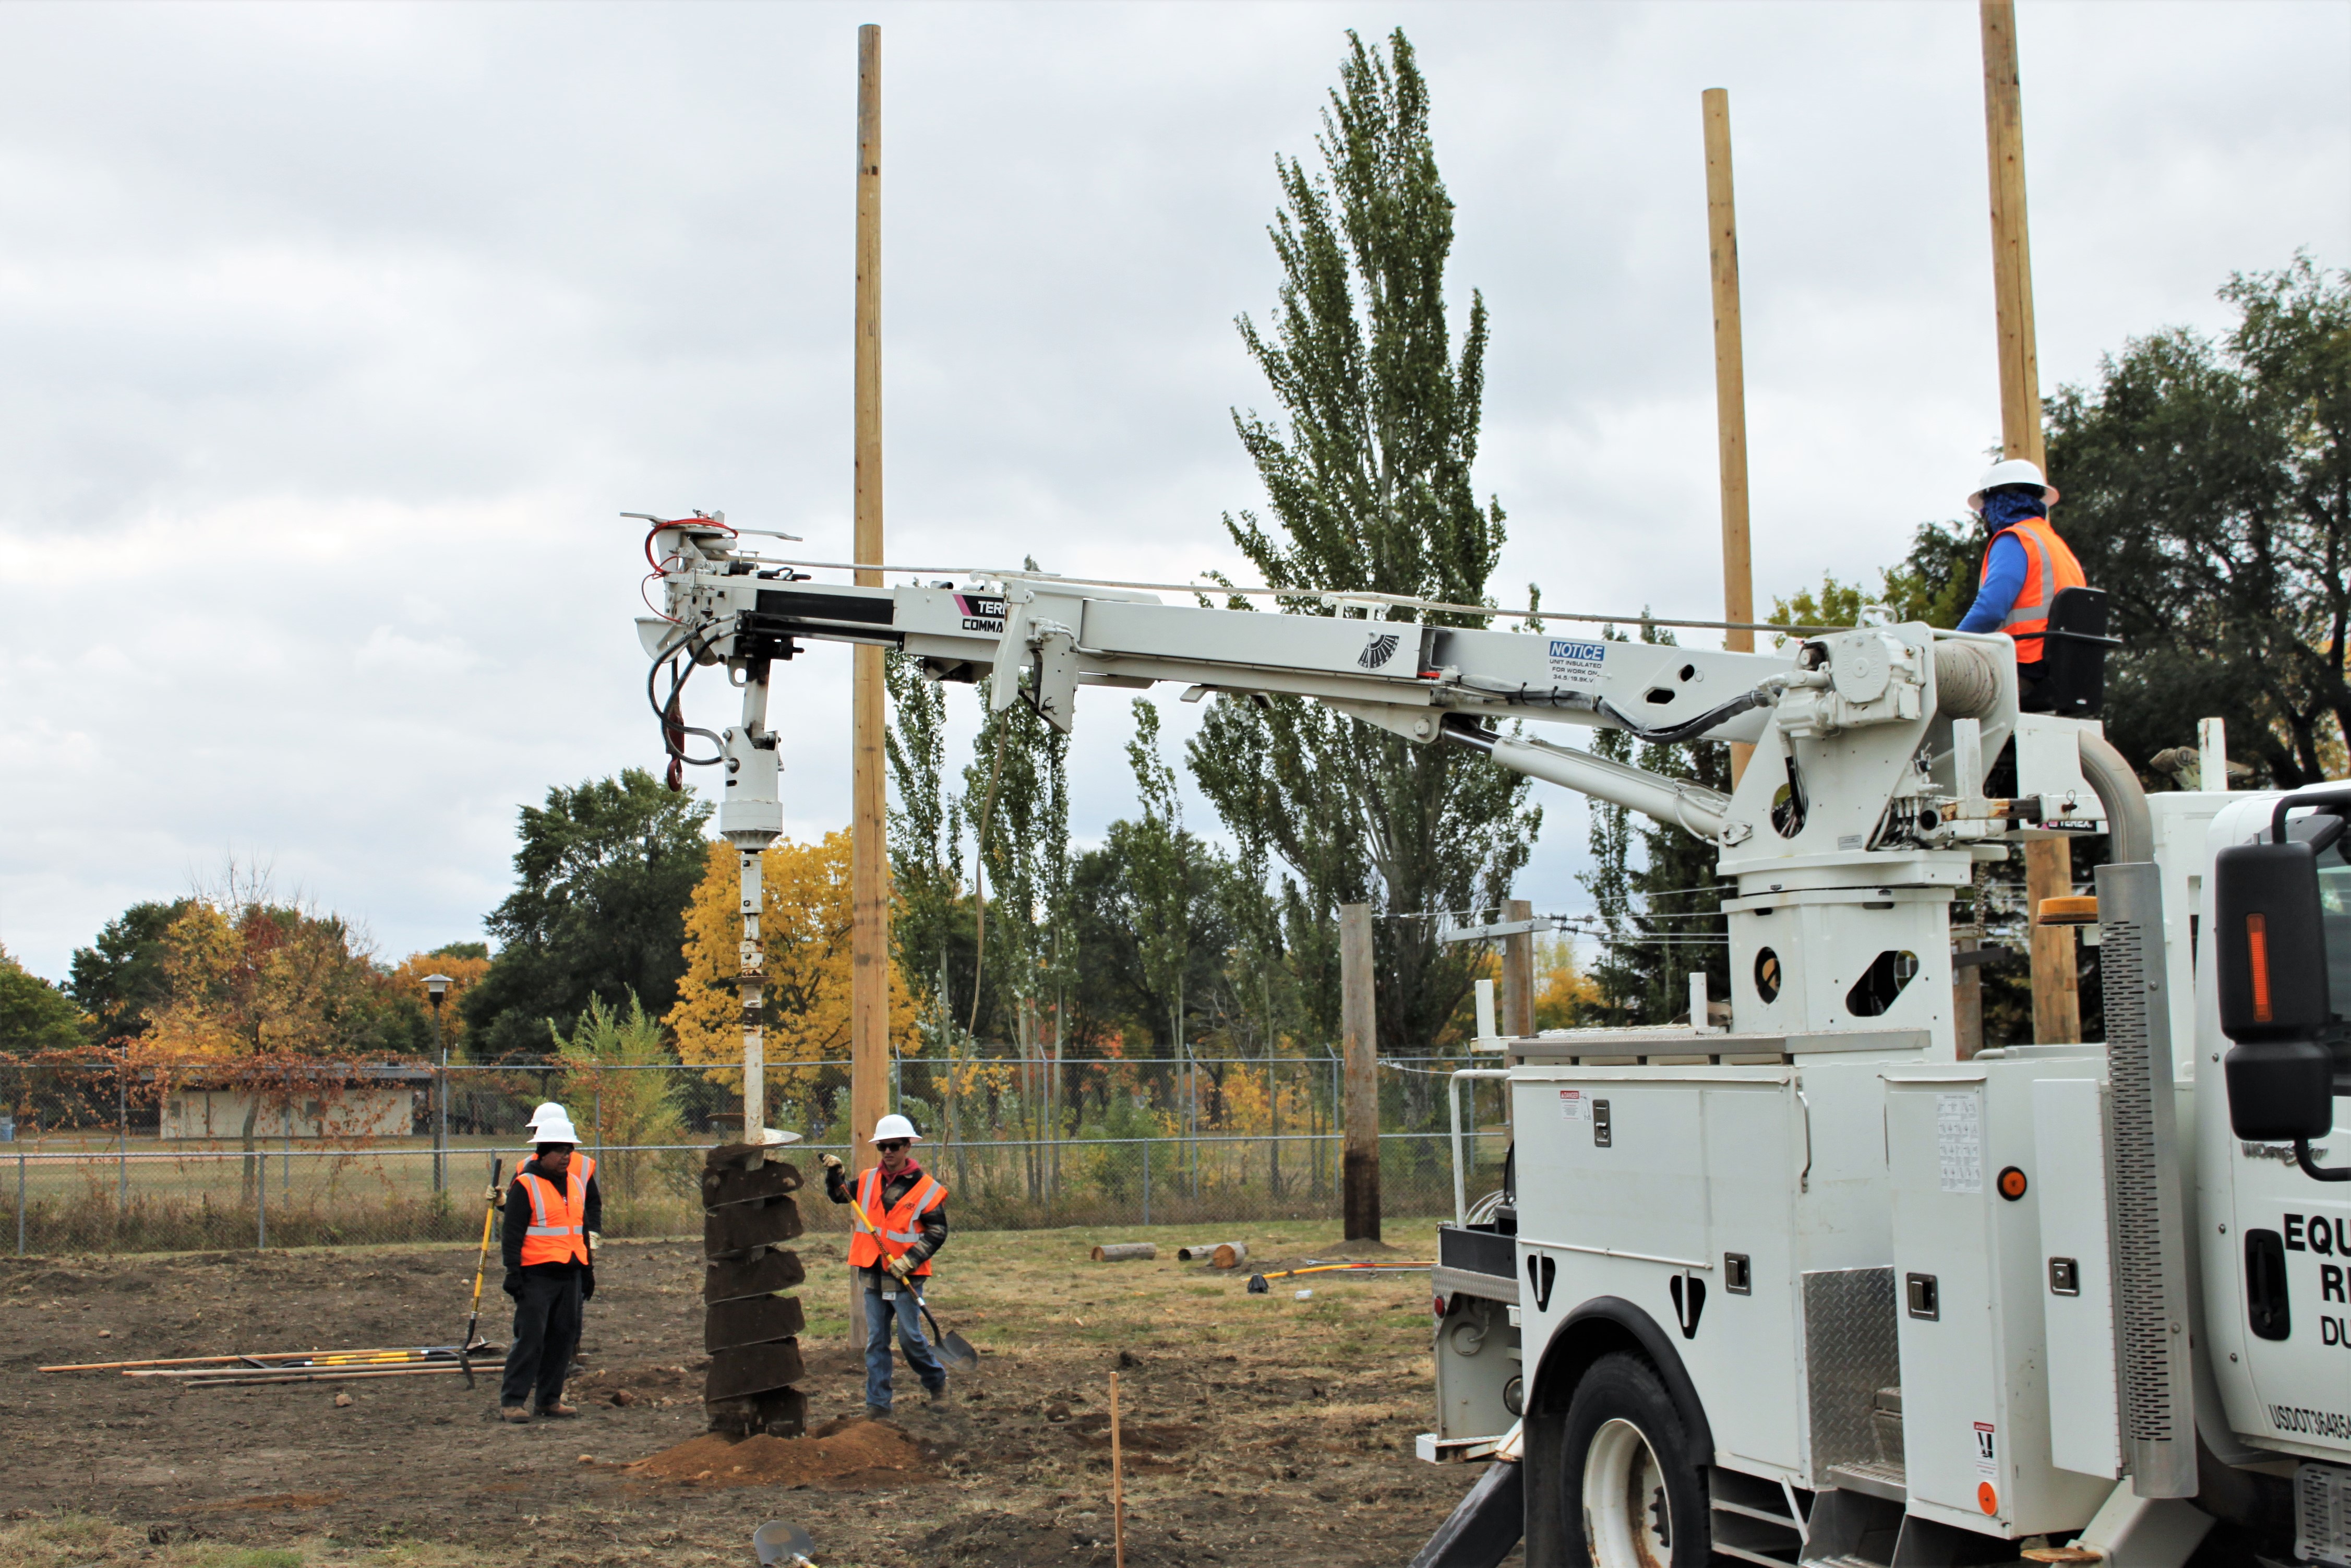 Electrical linework students in the new Energy Careers Academy set their first poles at the Xcel Energy training center in Hugo, Minn. in the fall of 2022.